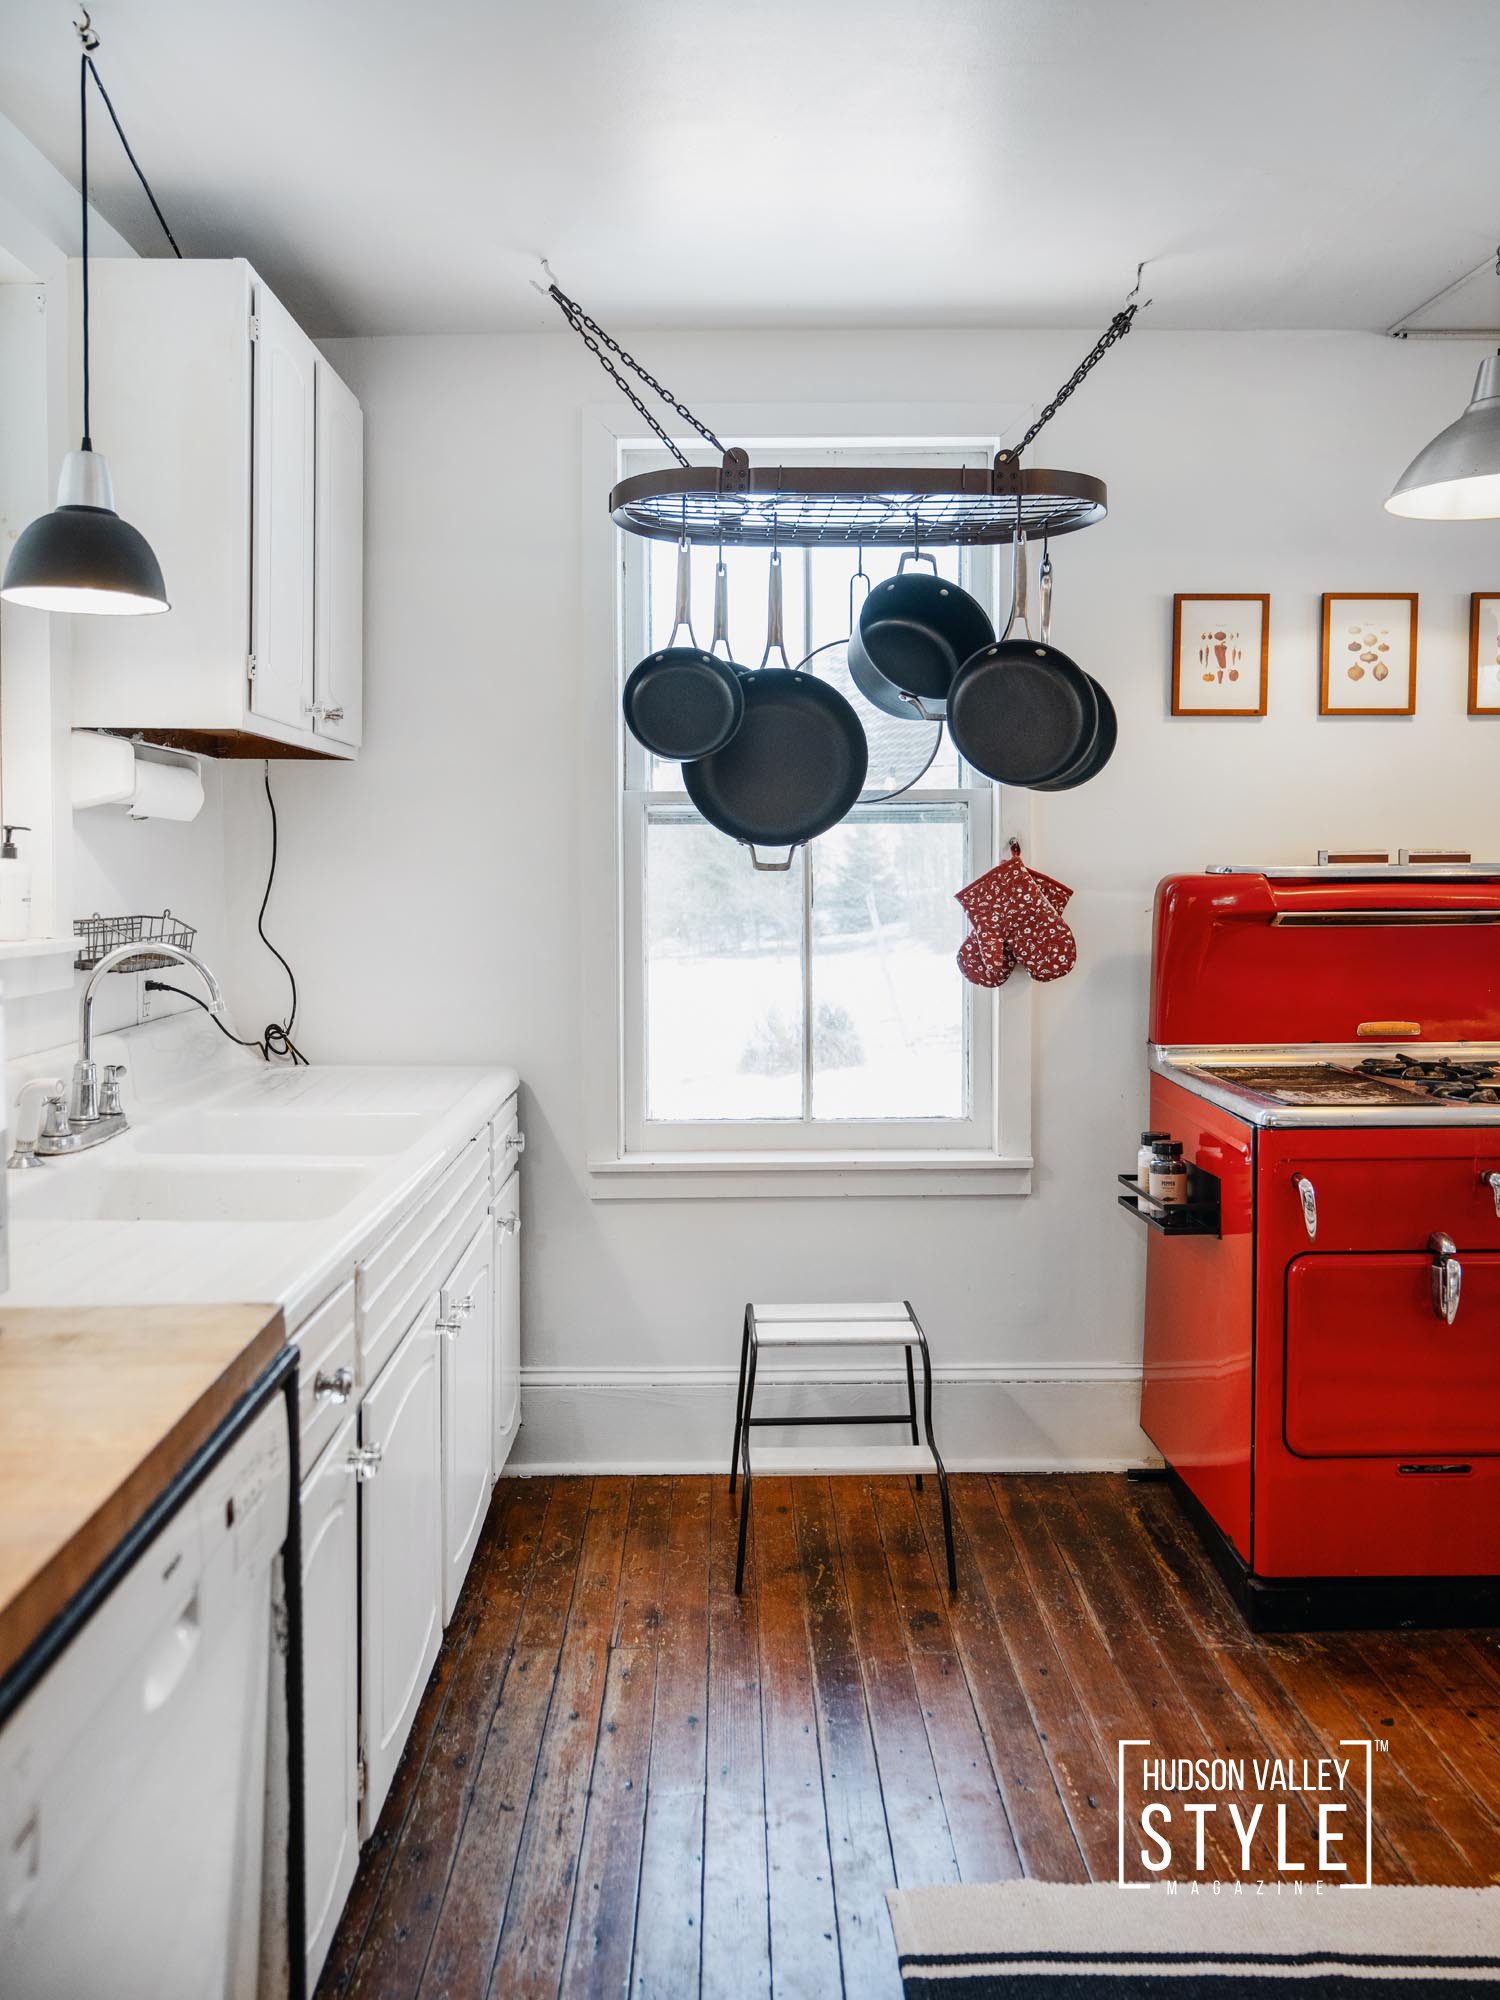 Experience Unforgettable Rustic Charm and Modern Flair in the Catskill Mountains at this Unique Farmhouse – Airbnb Review by Travel Photographer Maxwell Alexander